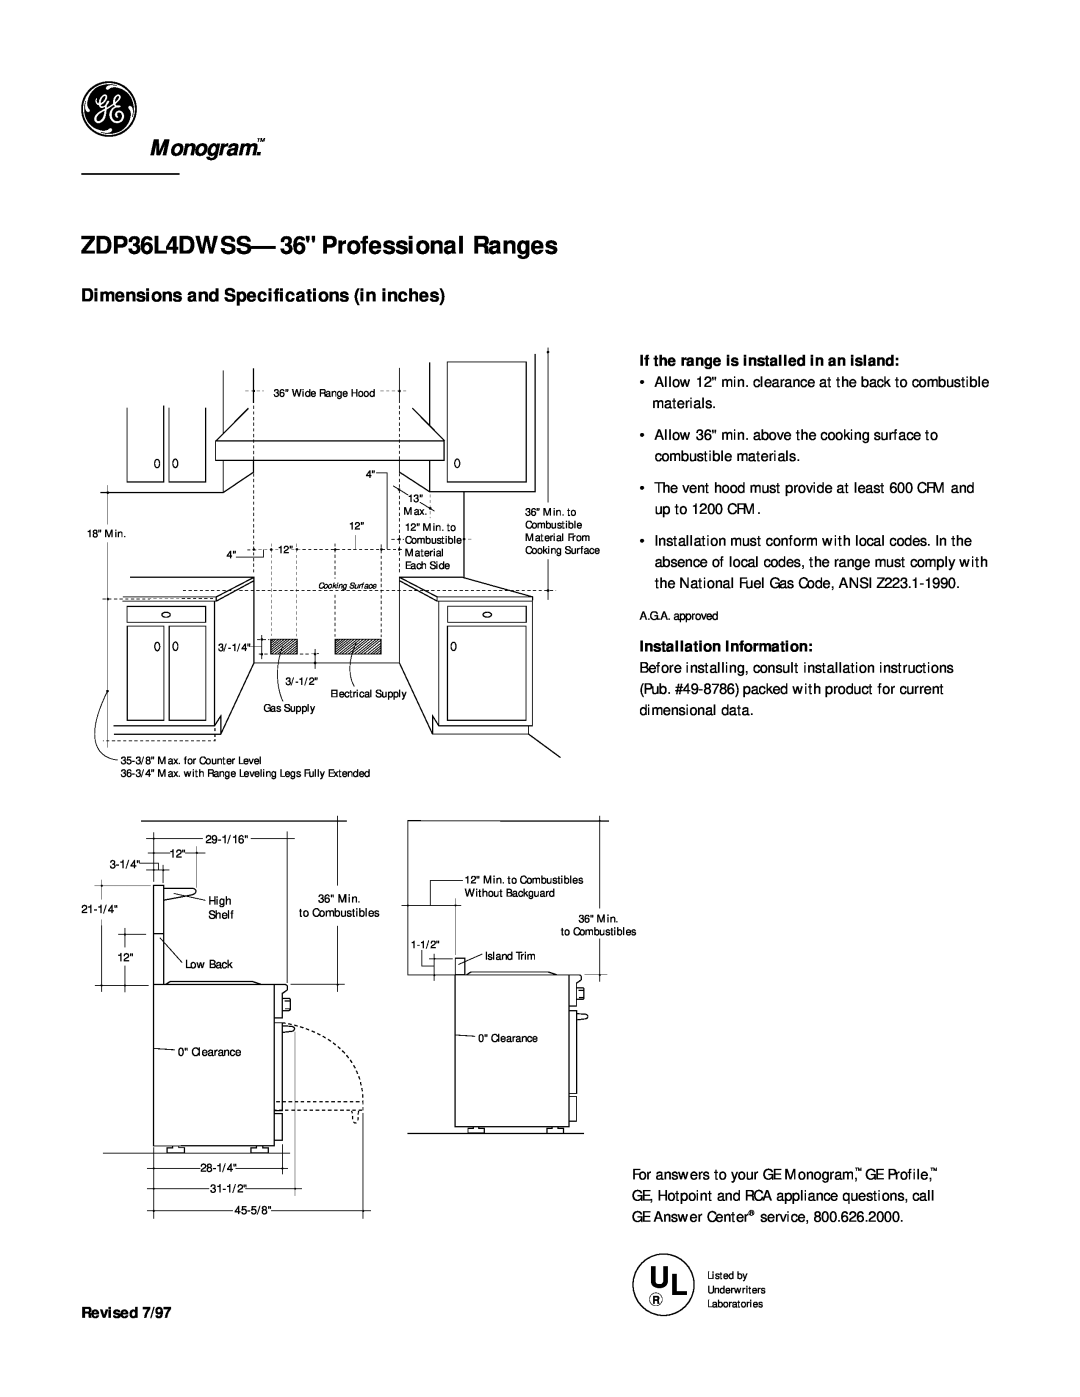 GE ZDP36L4DWSS-36 Professional Ranges, Monogram, Dimensions and Specifications in inches, Installation Information 